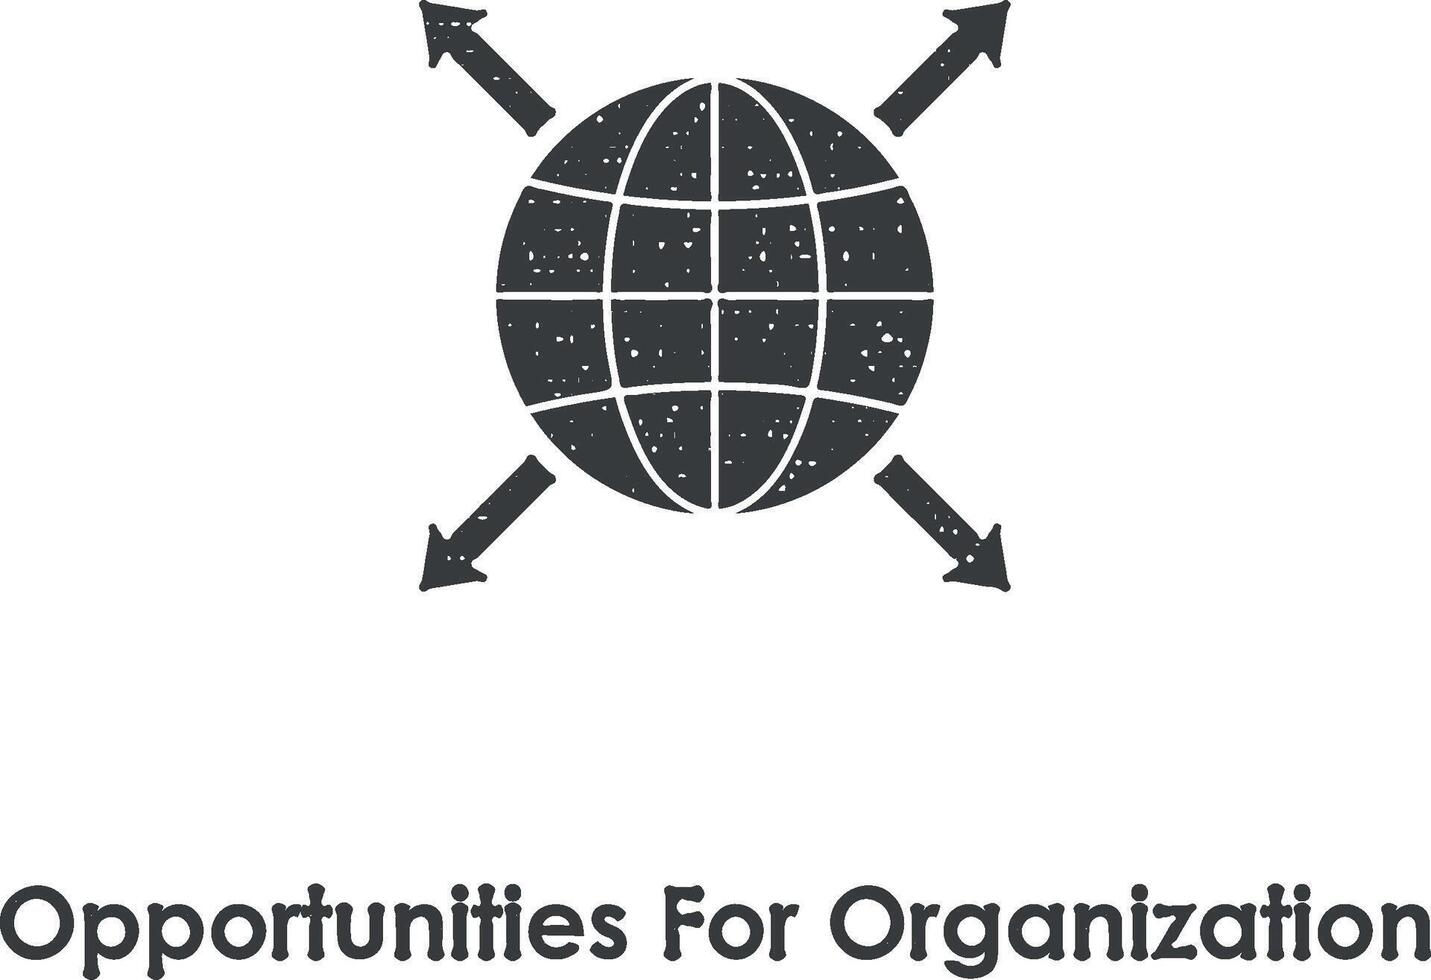 world, arrow, global, opportunities for organization vector icon illustration with stamp effect